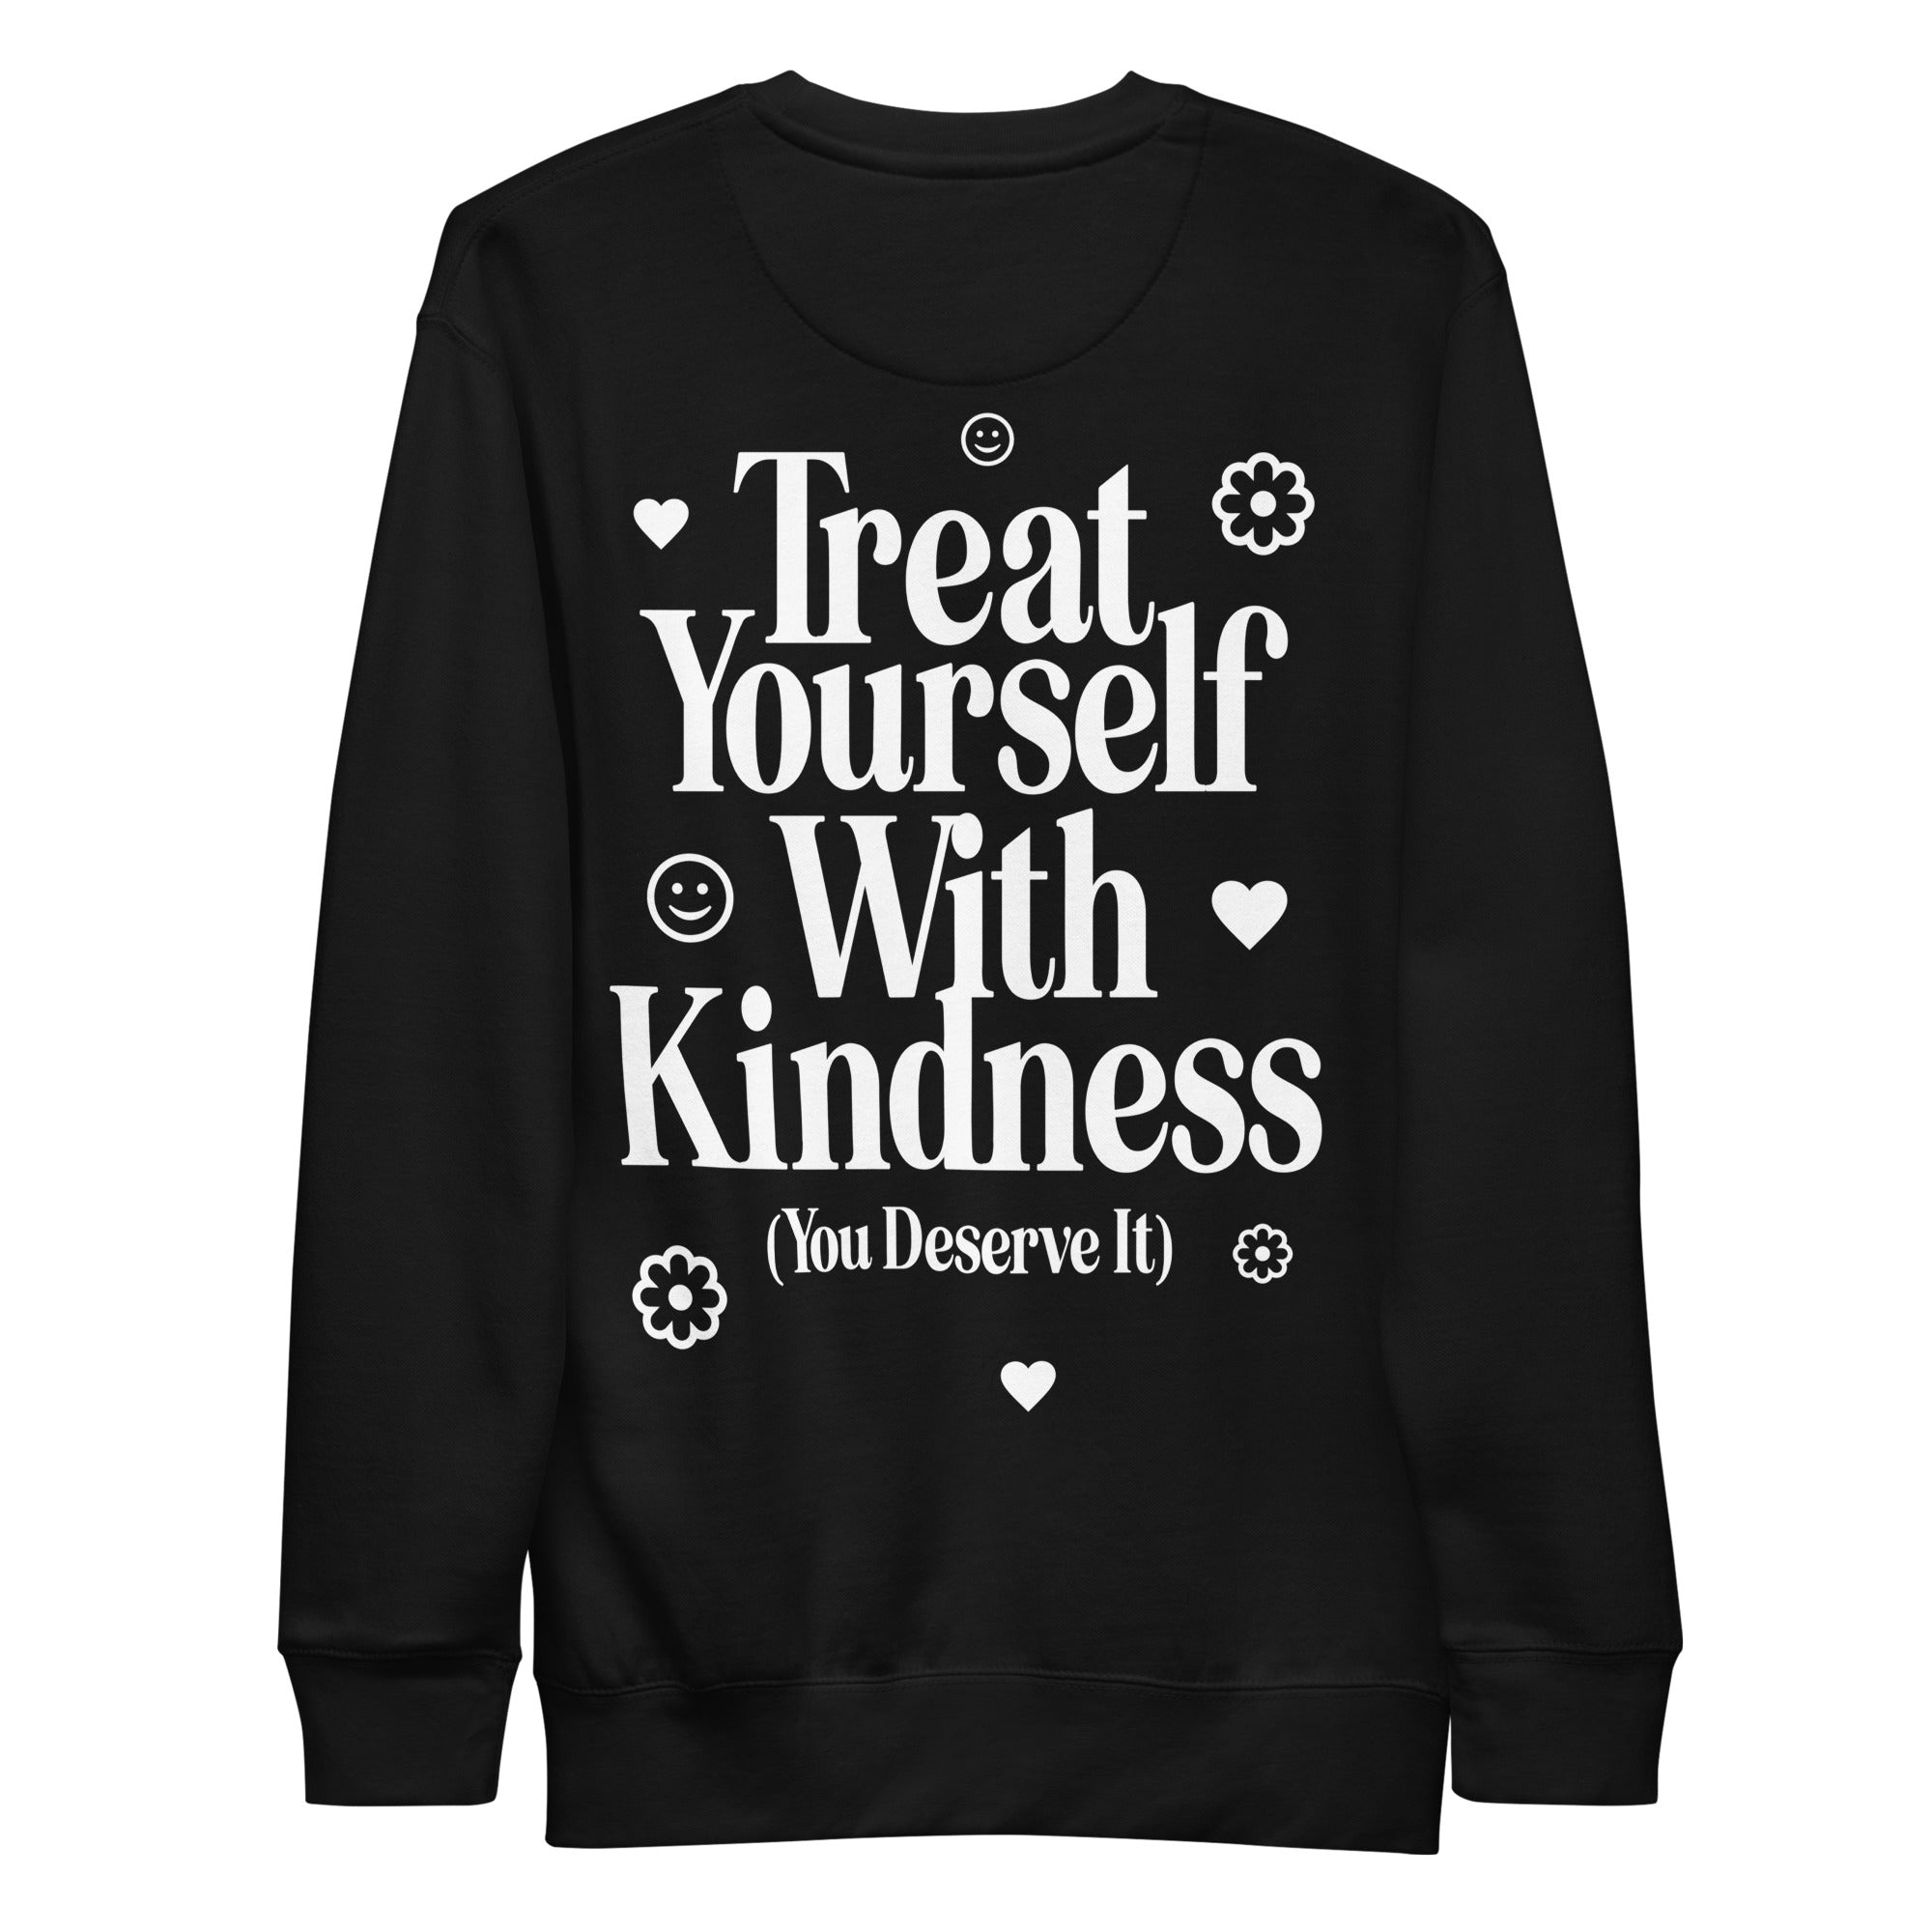 'Treat Yourself With Kindness' Green Brick Boutique Unisex Sweatshirt - Shirts & Tops - The Green Brick Boutique